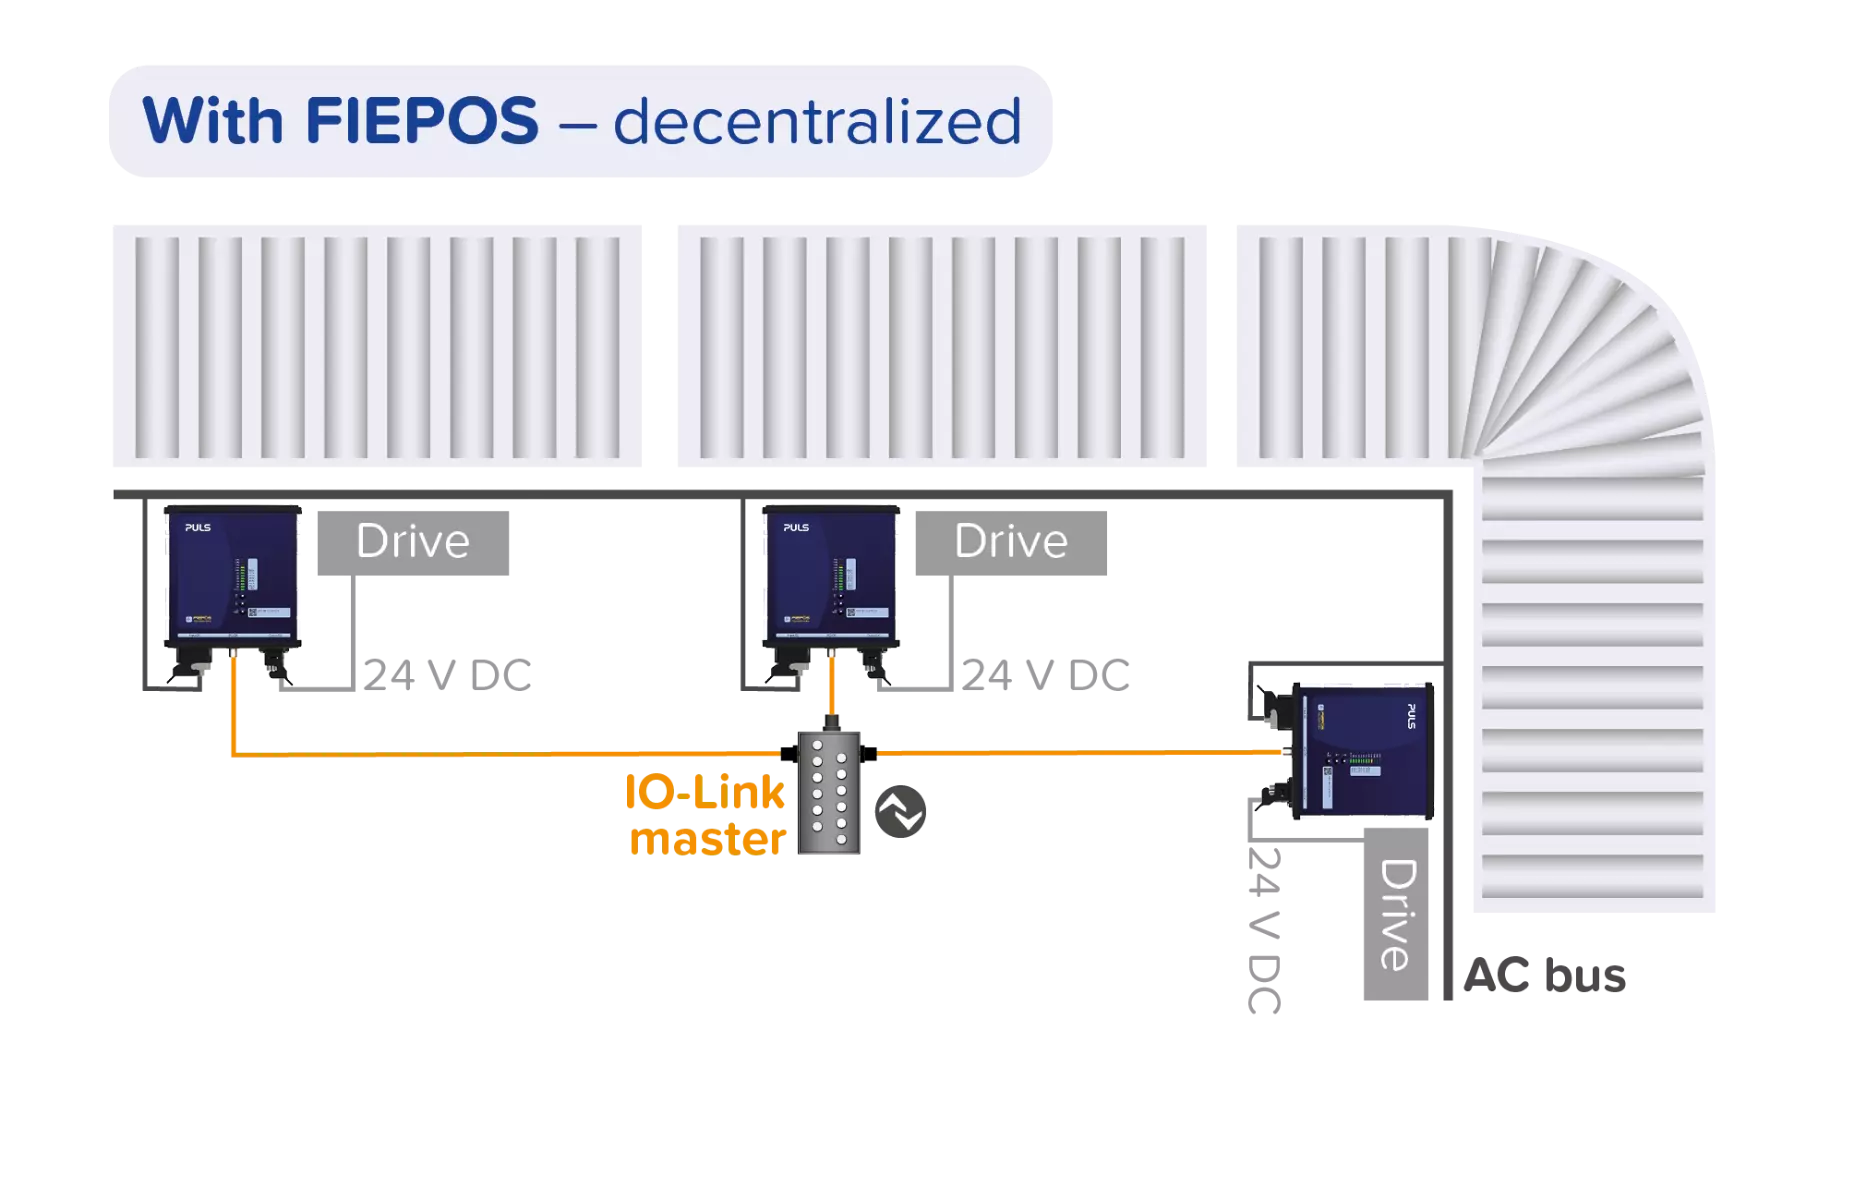 Decentralized power supply with FIEPOS products from PULS